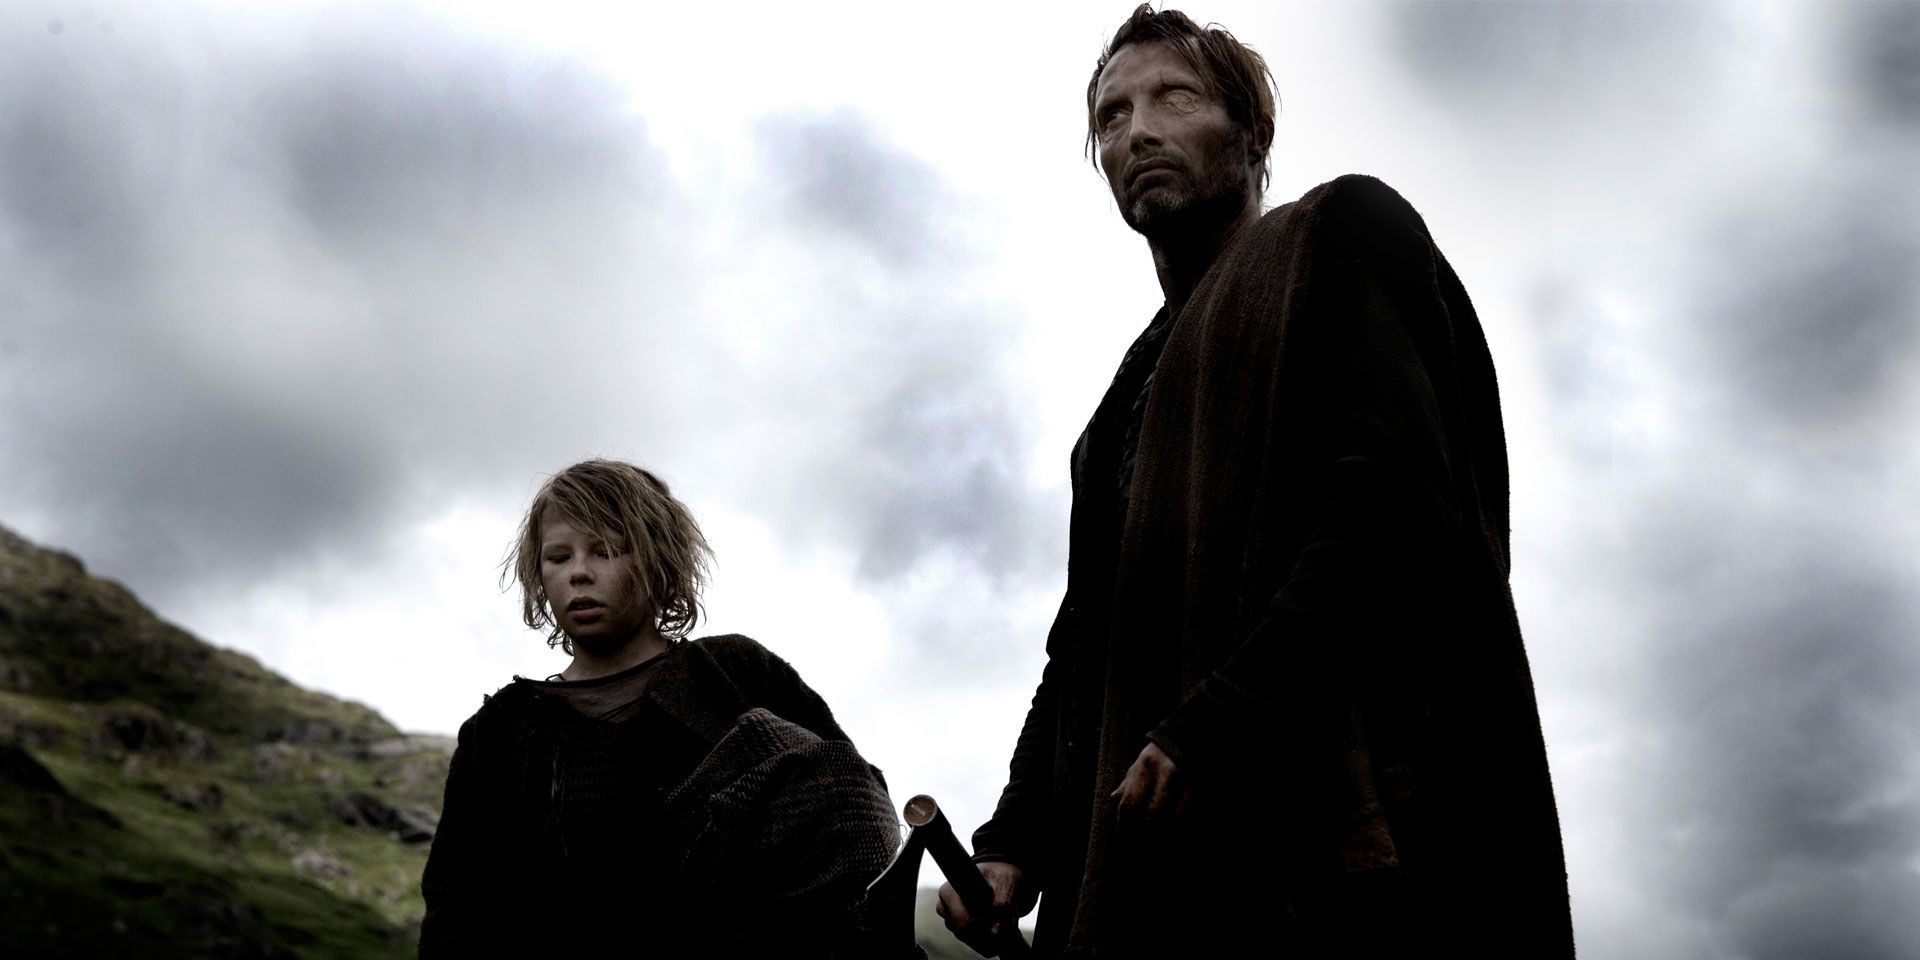 The Boy and Mads Mikkelsen as One-Eye in Valhalla Rising